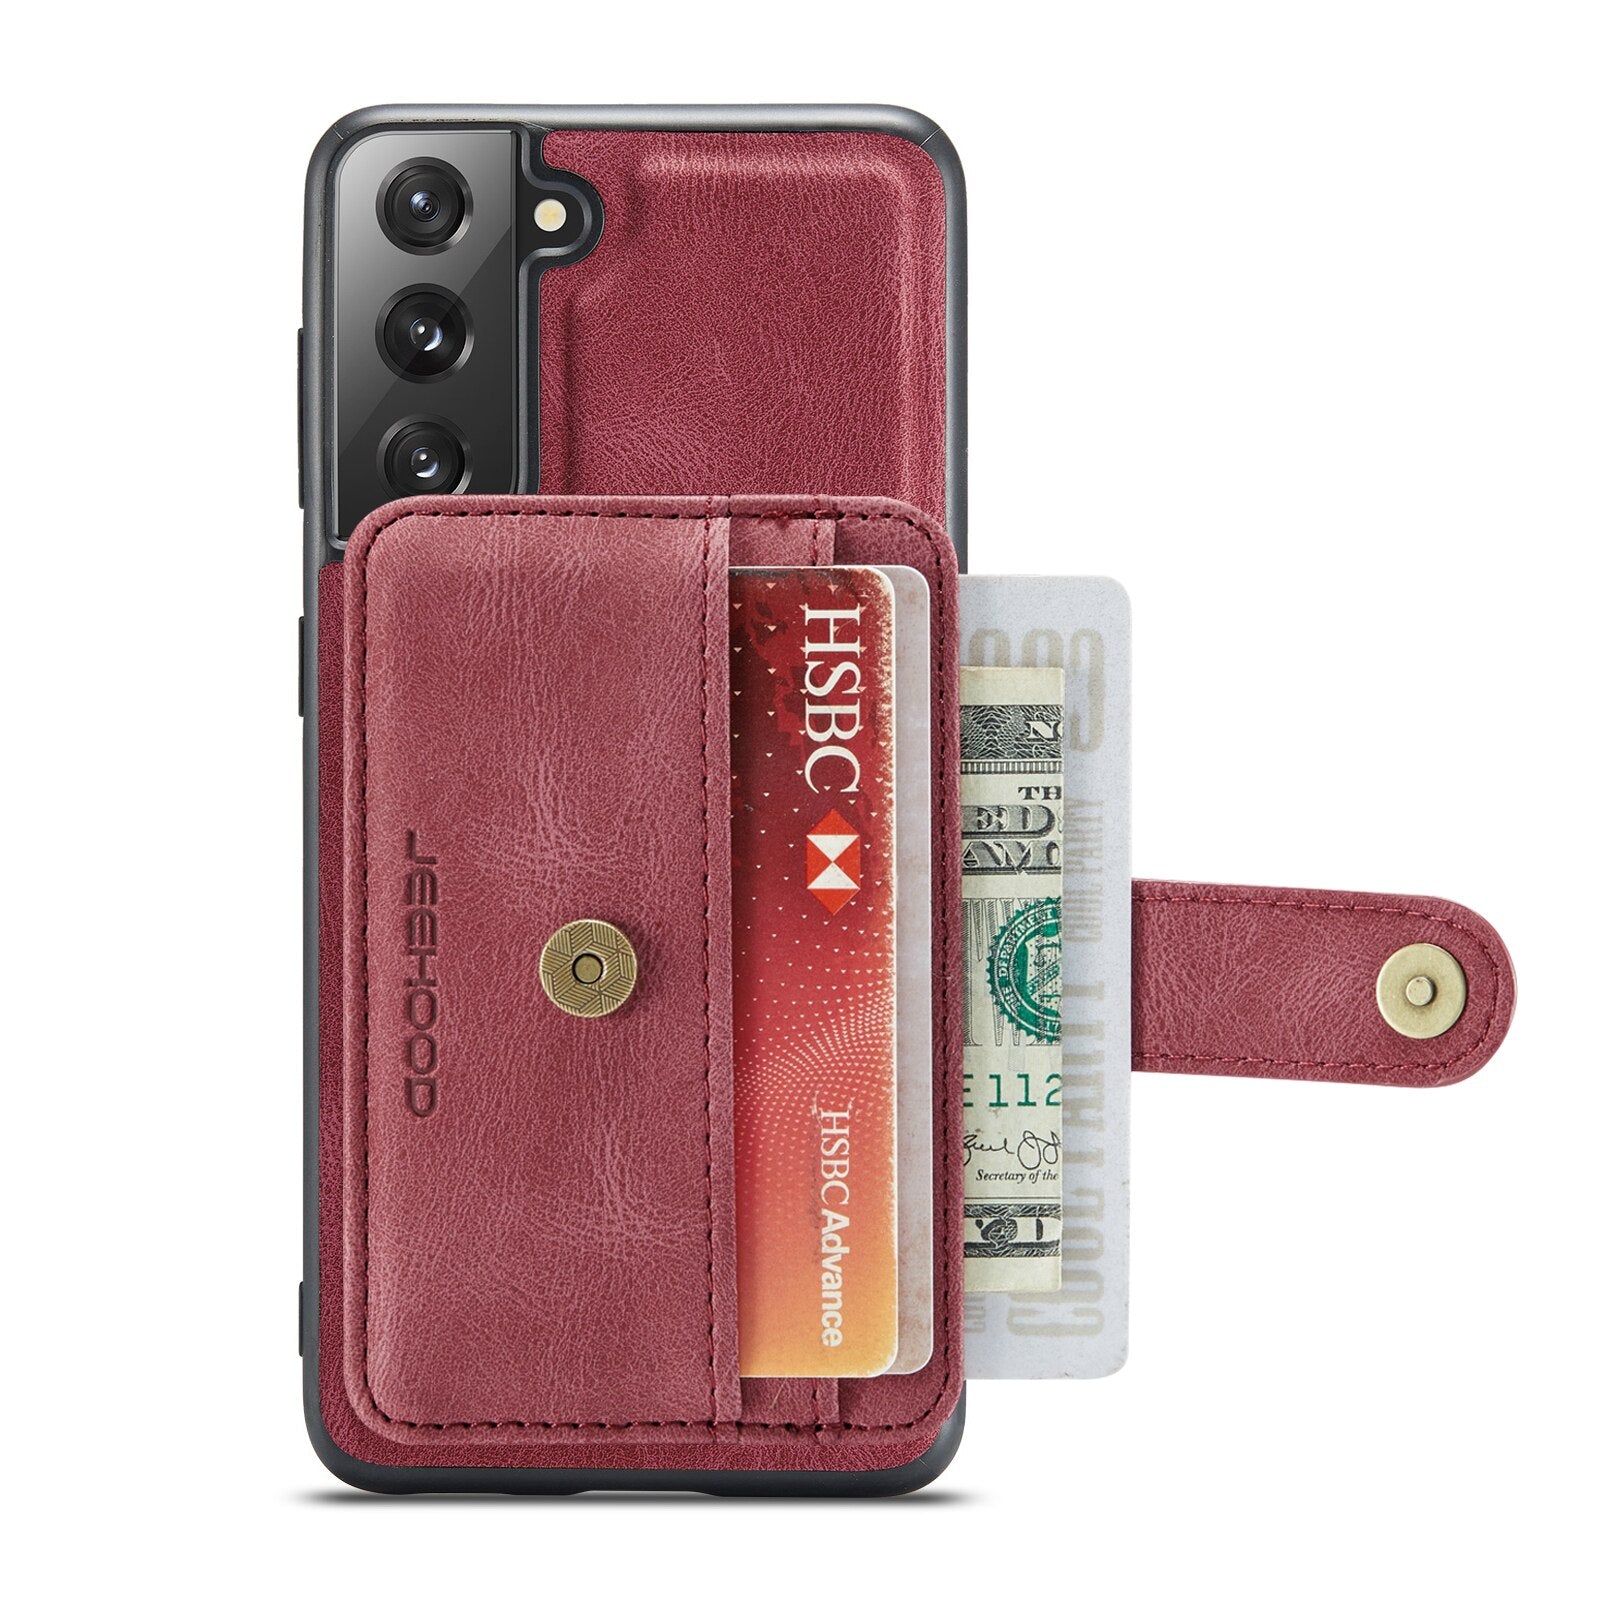 Luxury Magnetic Safe Leather Case Anti-theft brush For Samsung Galaxy S22 Ultra S22+Plus Wallet Card Solt Bag Stand Holder Cover - 0 for Galaxy S21 FE / Red / United States Find Epic Store